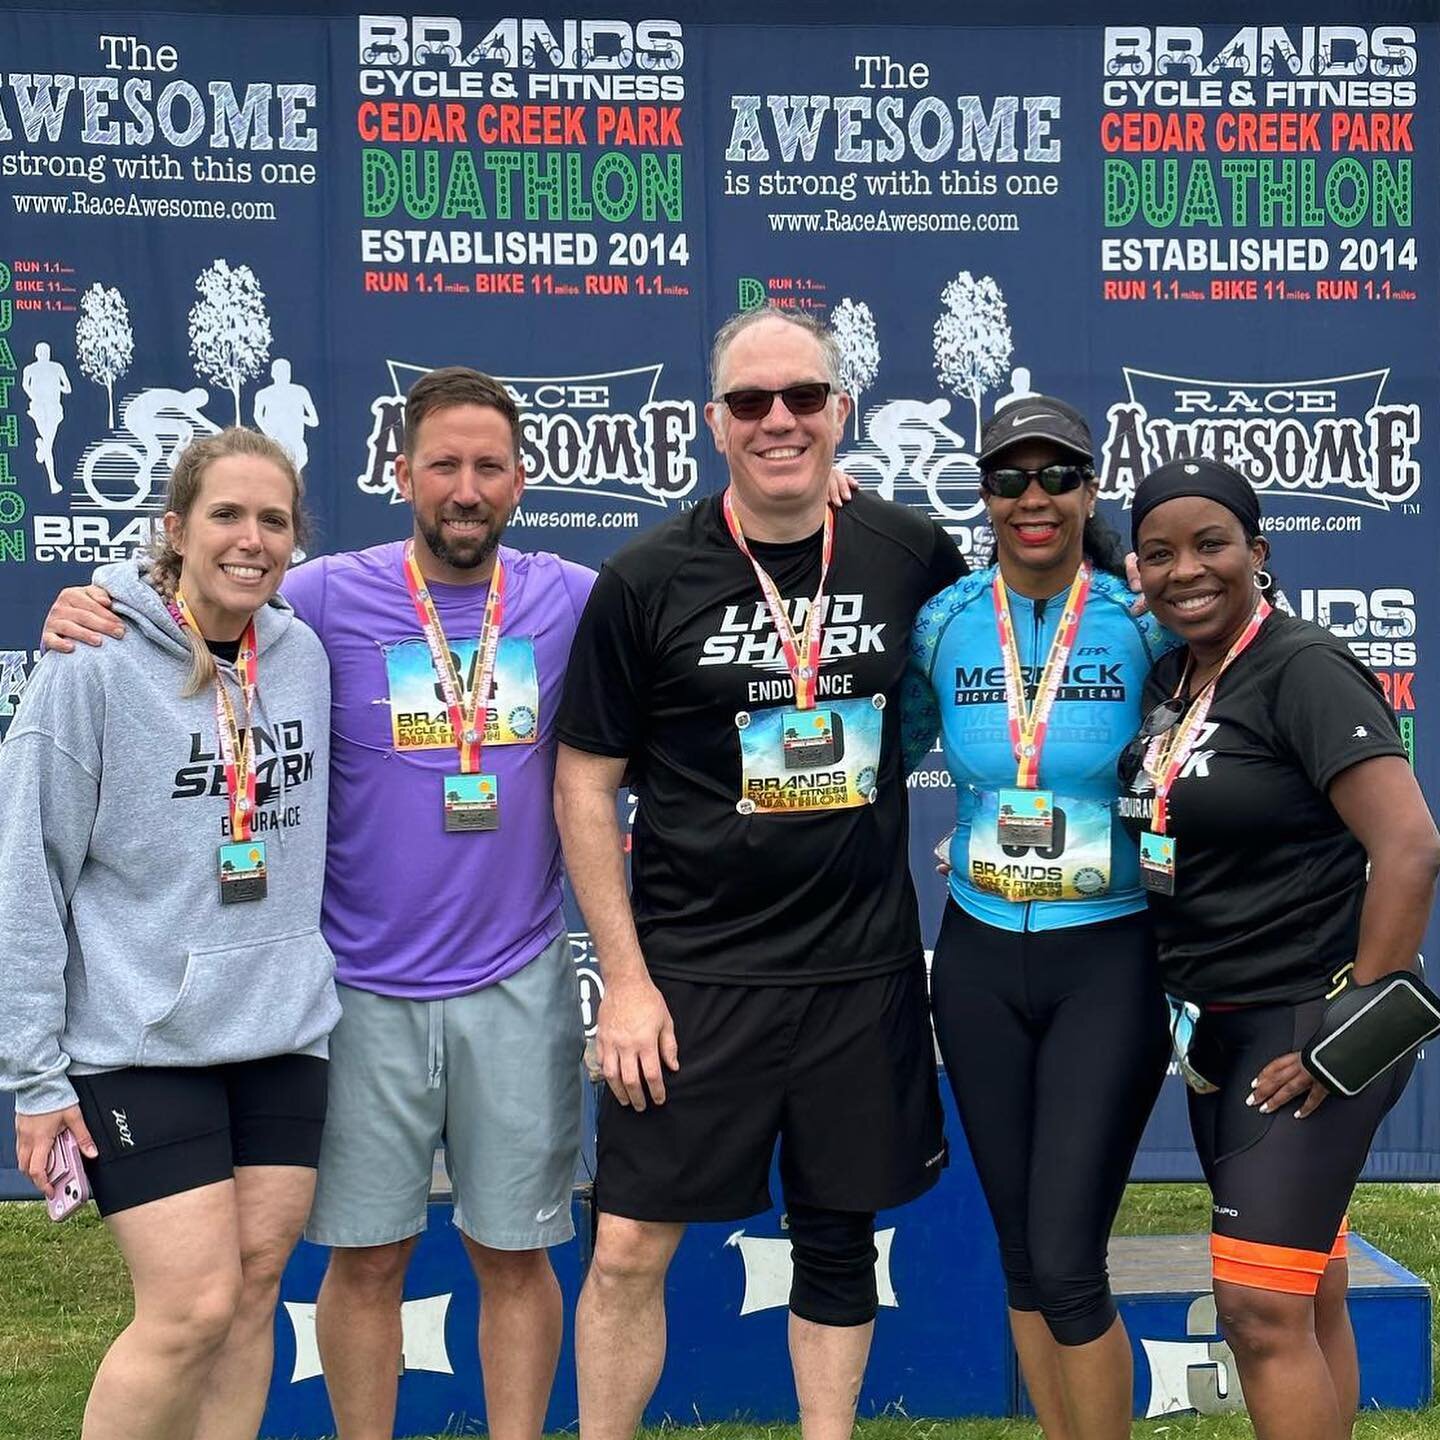 Another week spent catching up with all the awesome work this crew did!💥 From races, to hikes, long runs, bike rides, beach cruises &amp; even a refresher in flat tires. 😉

Congratulations to Jackie Lemon-Denton, Nicole Sabbatino, Anthony Zito, Sue